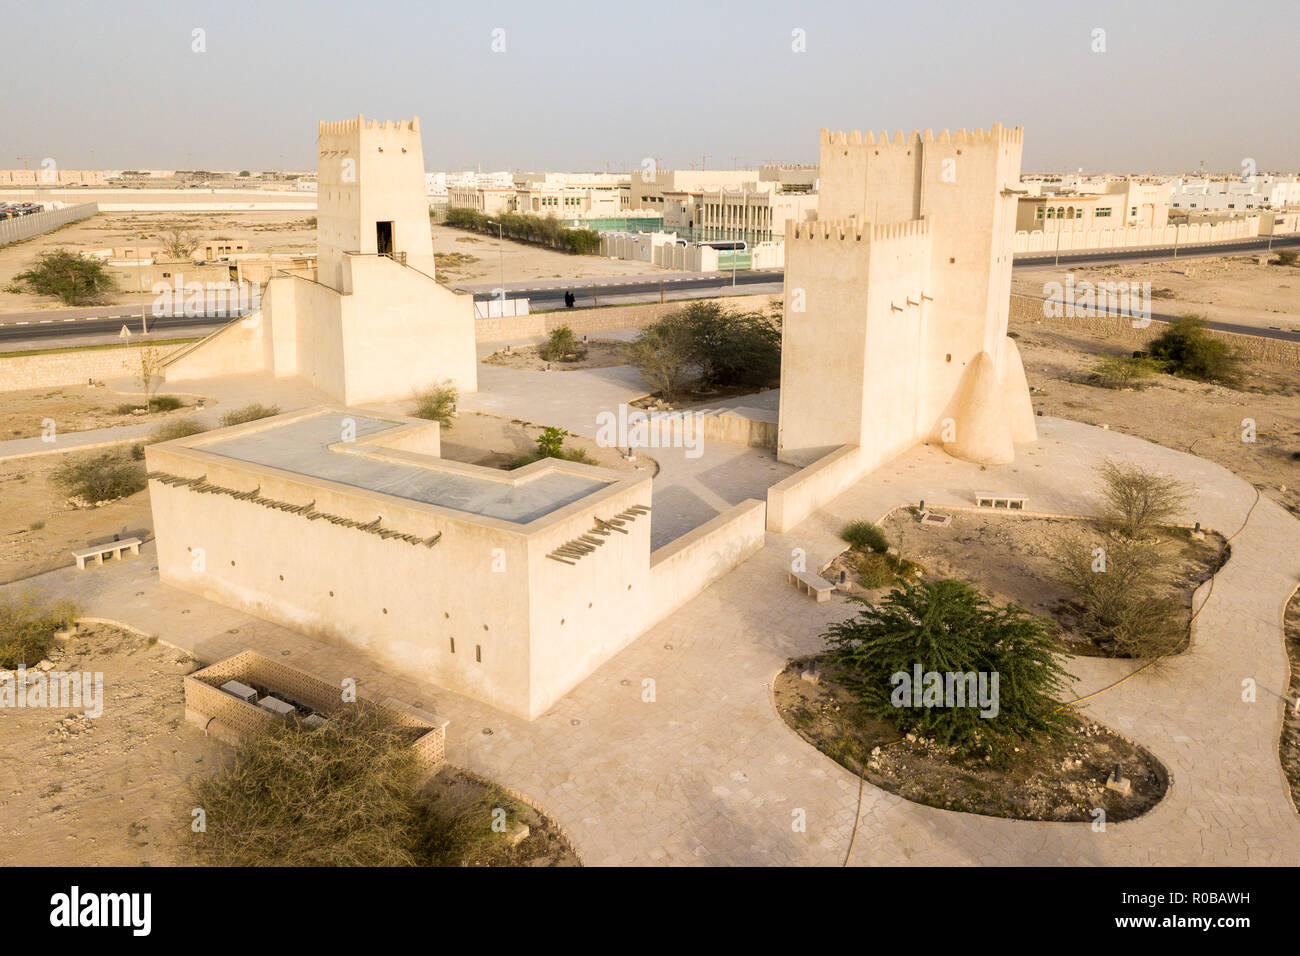 Barzan watchtowers built with coral rock and limestone, Umm Salal Mohammed Fort Towers, ancient Arabian fortification near Doha, Qatar. Stock Photo